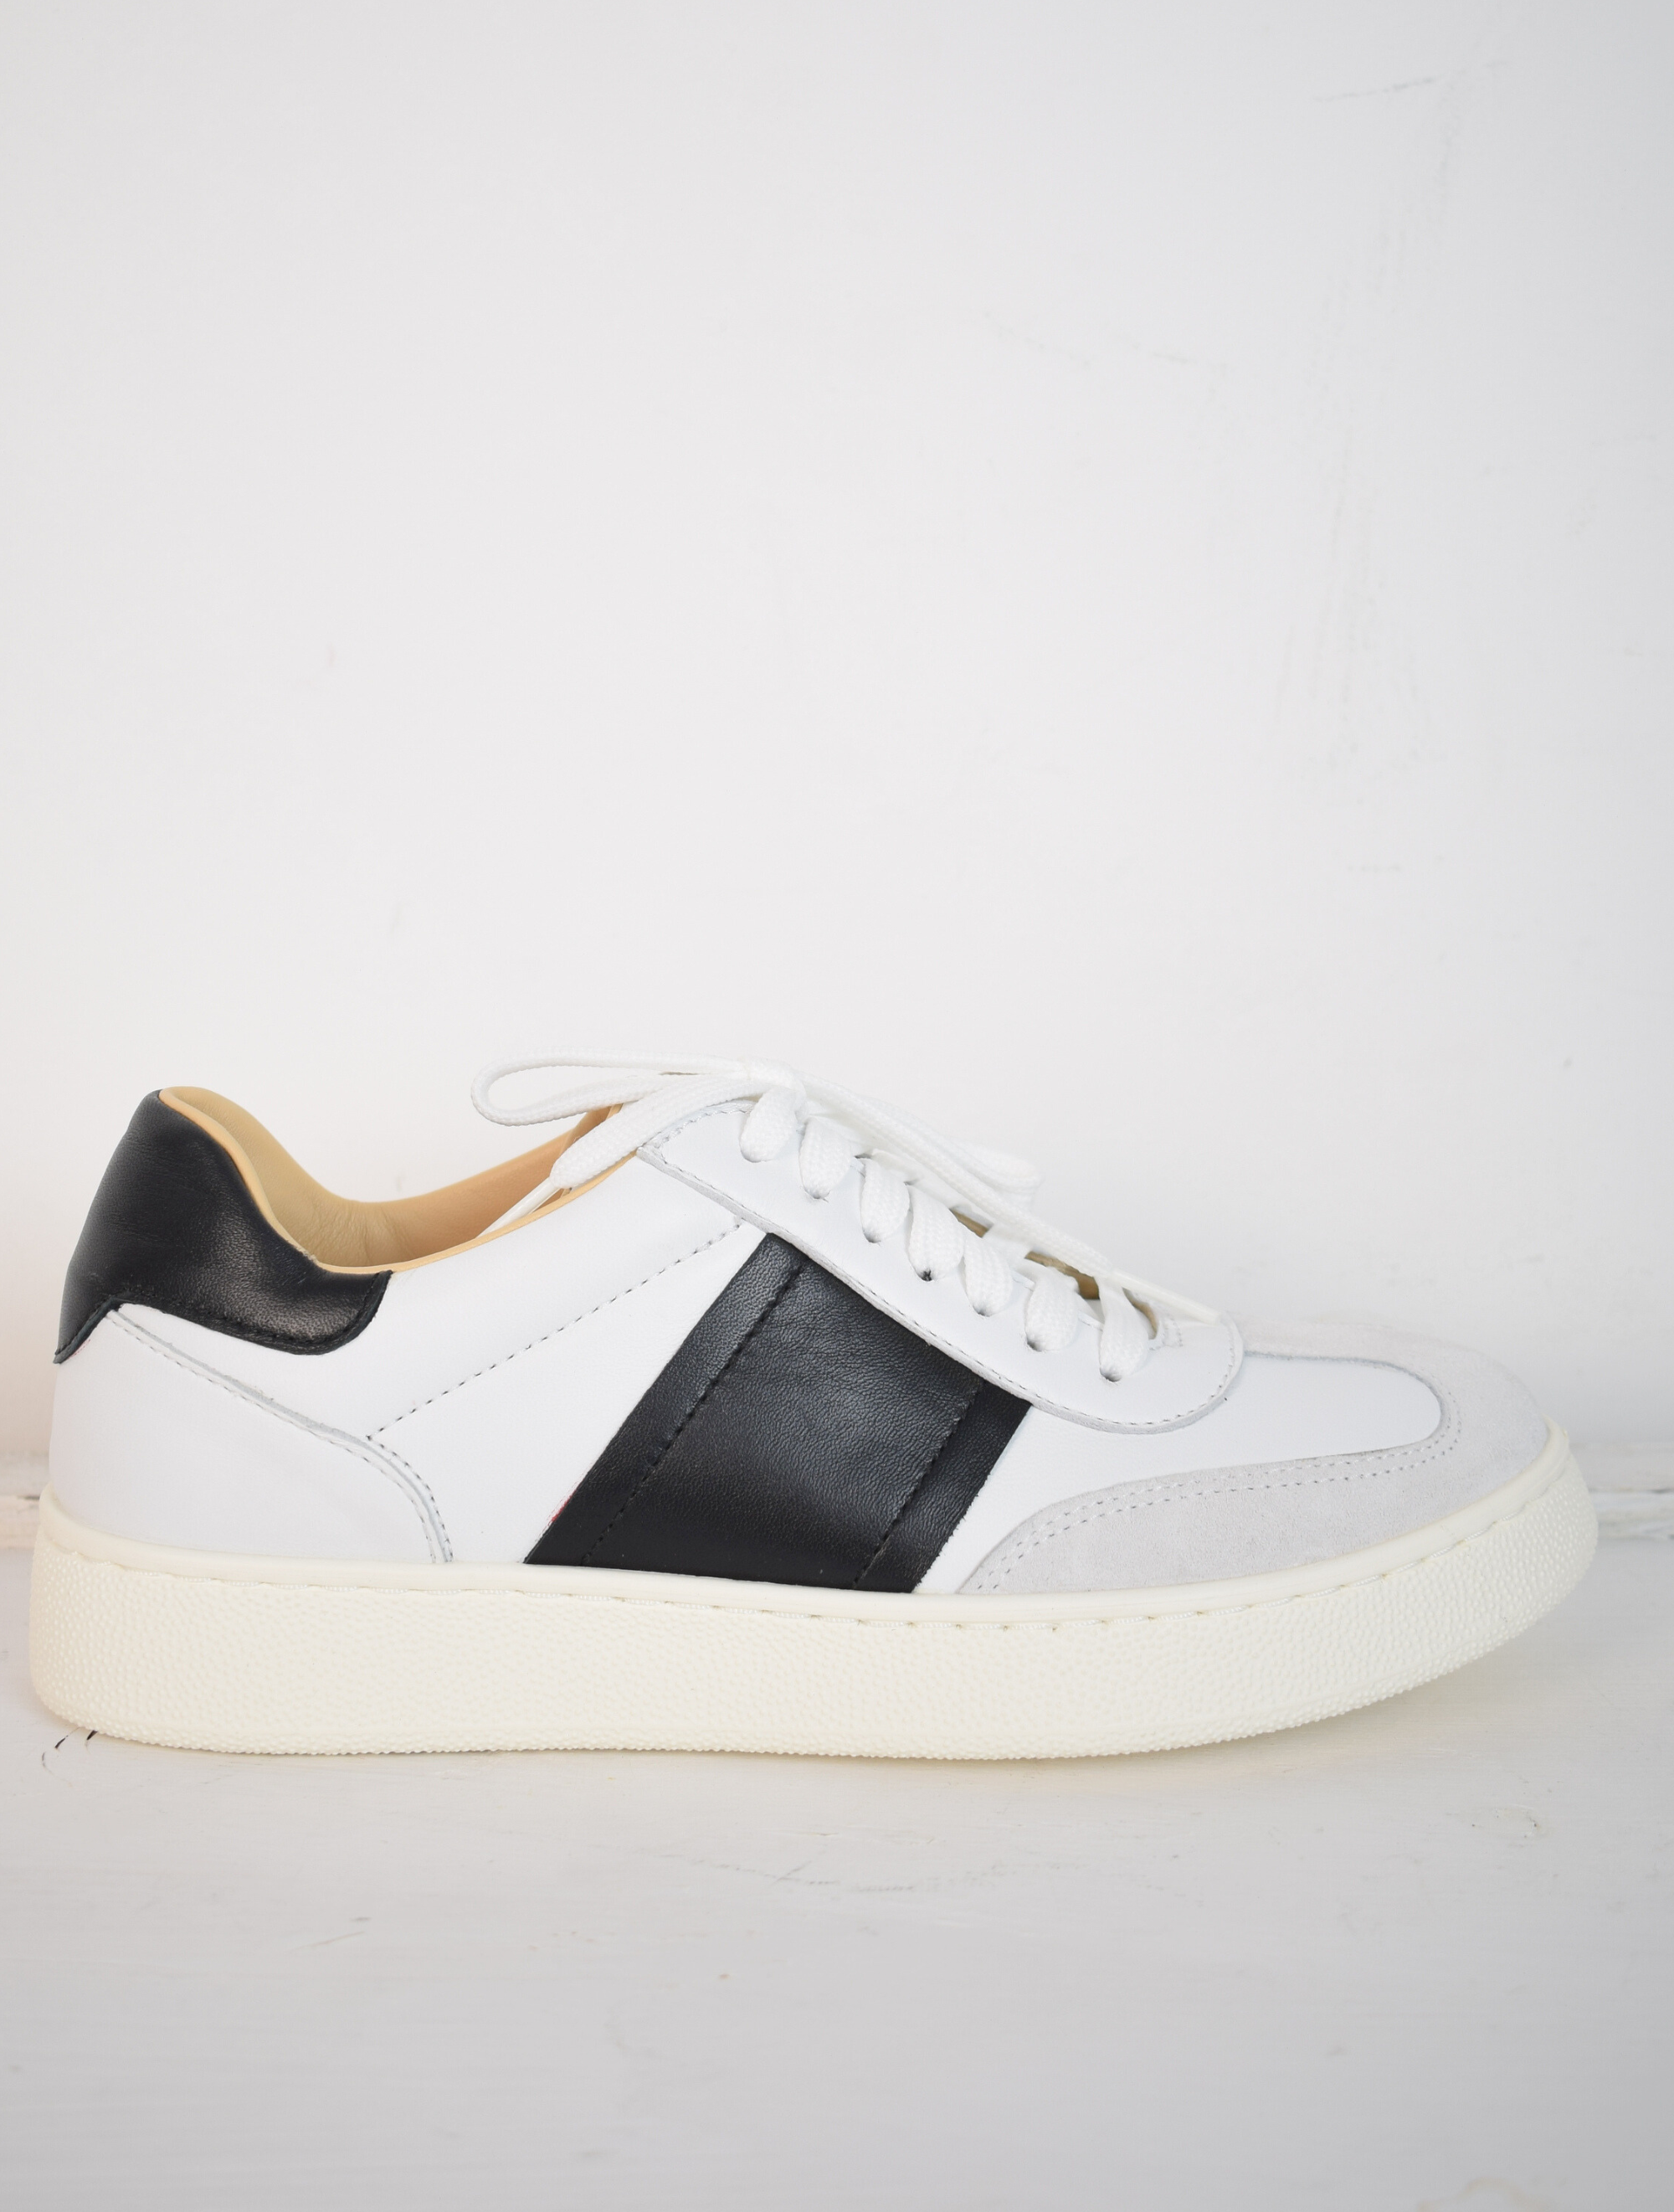 White trainer with black detail on sides and back 